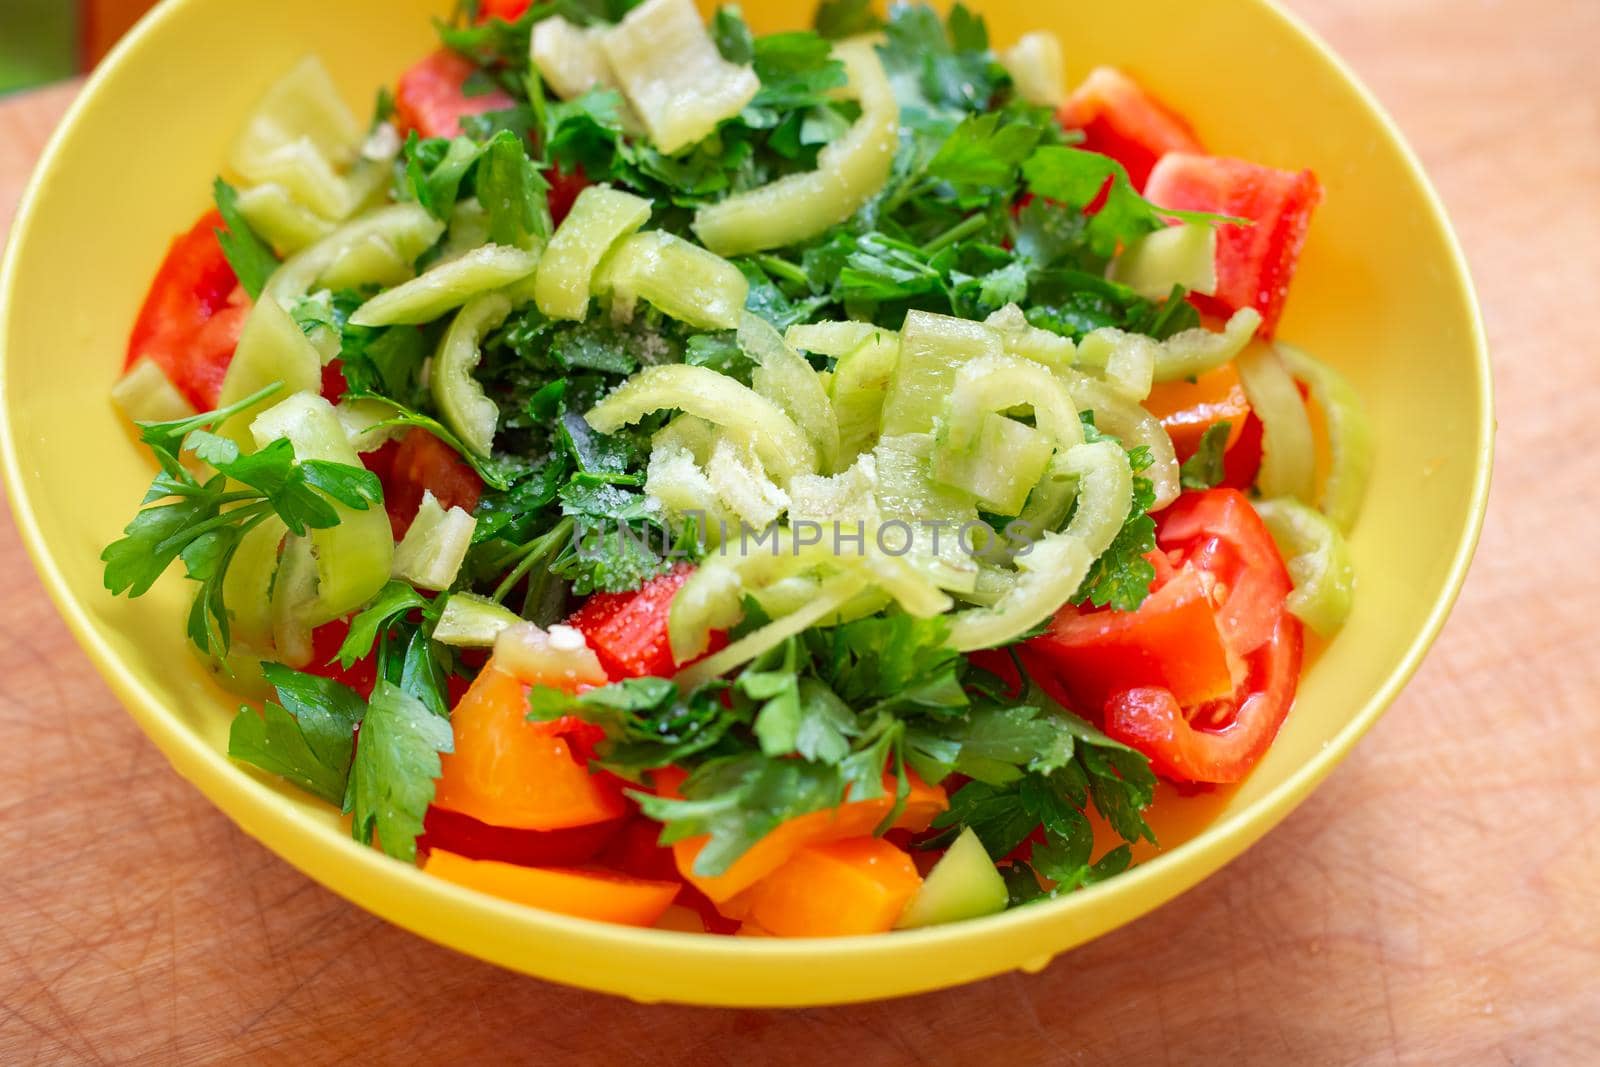 Vegetable salad with fresh tomatoes, peppers and parsley in a yellow cup. Delicious healthy snack.